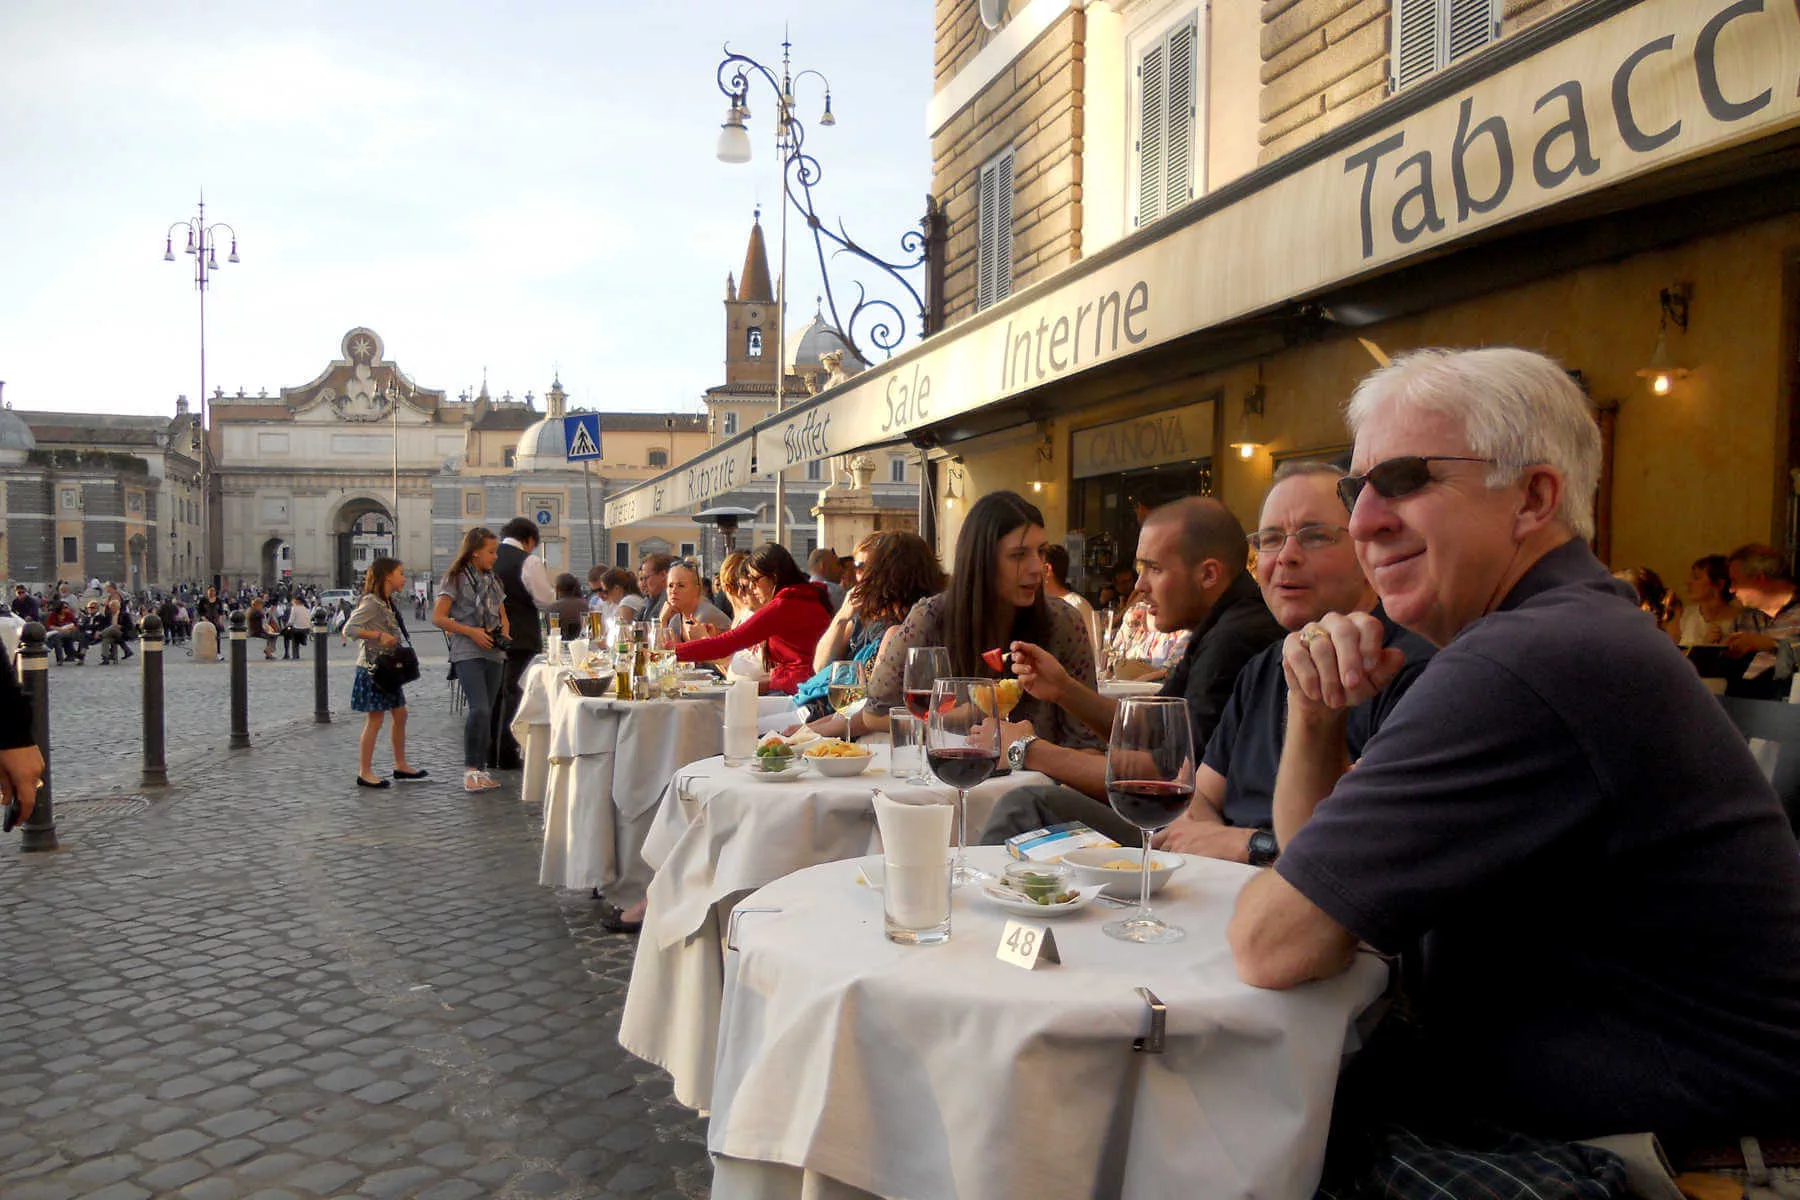 You can become a "temporary European" just by spending a relaxing hour at a café table